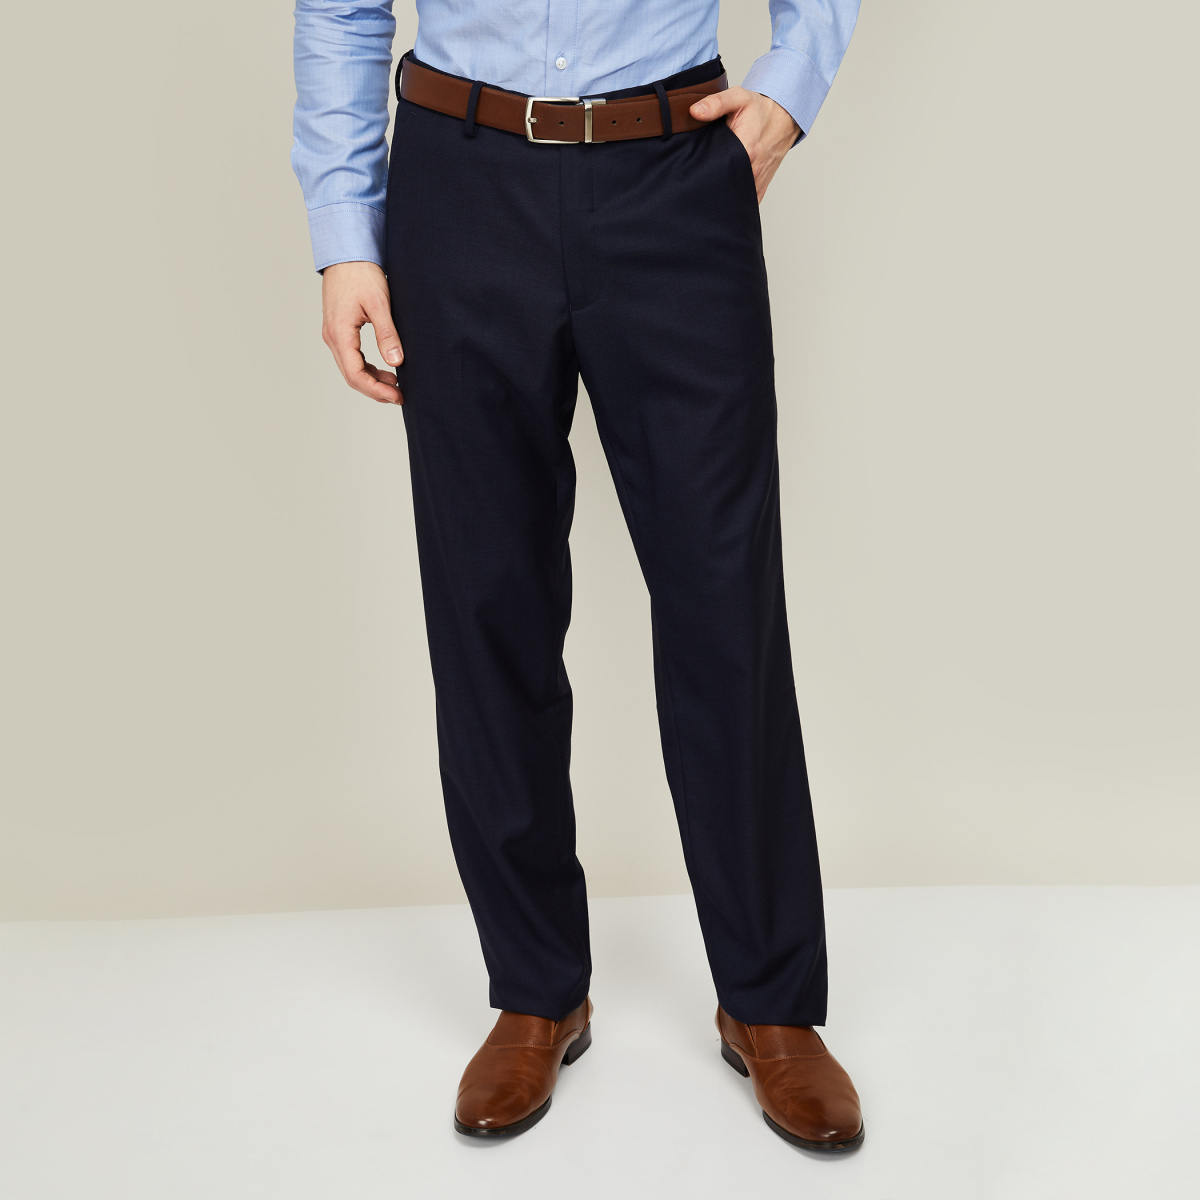 Korean Style Mens Casual Dress Formal Pants For Men Solid Color, Loose Straight  Fit, Office Formal Wear H11 230630 From Long01, $28.55 | DHgate.Com